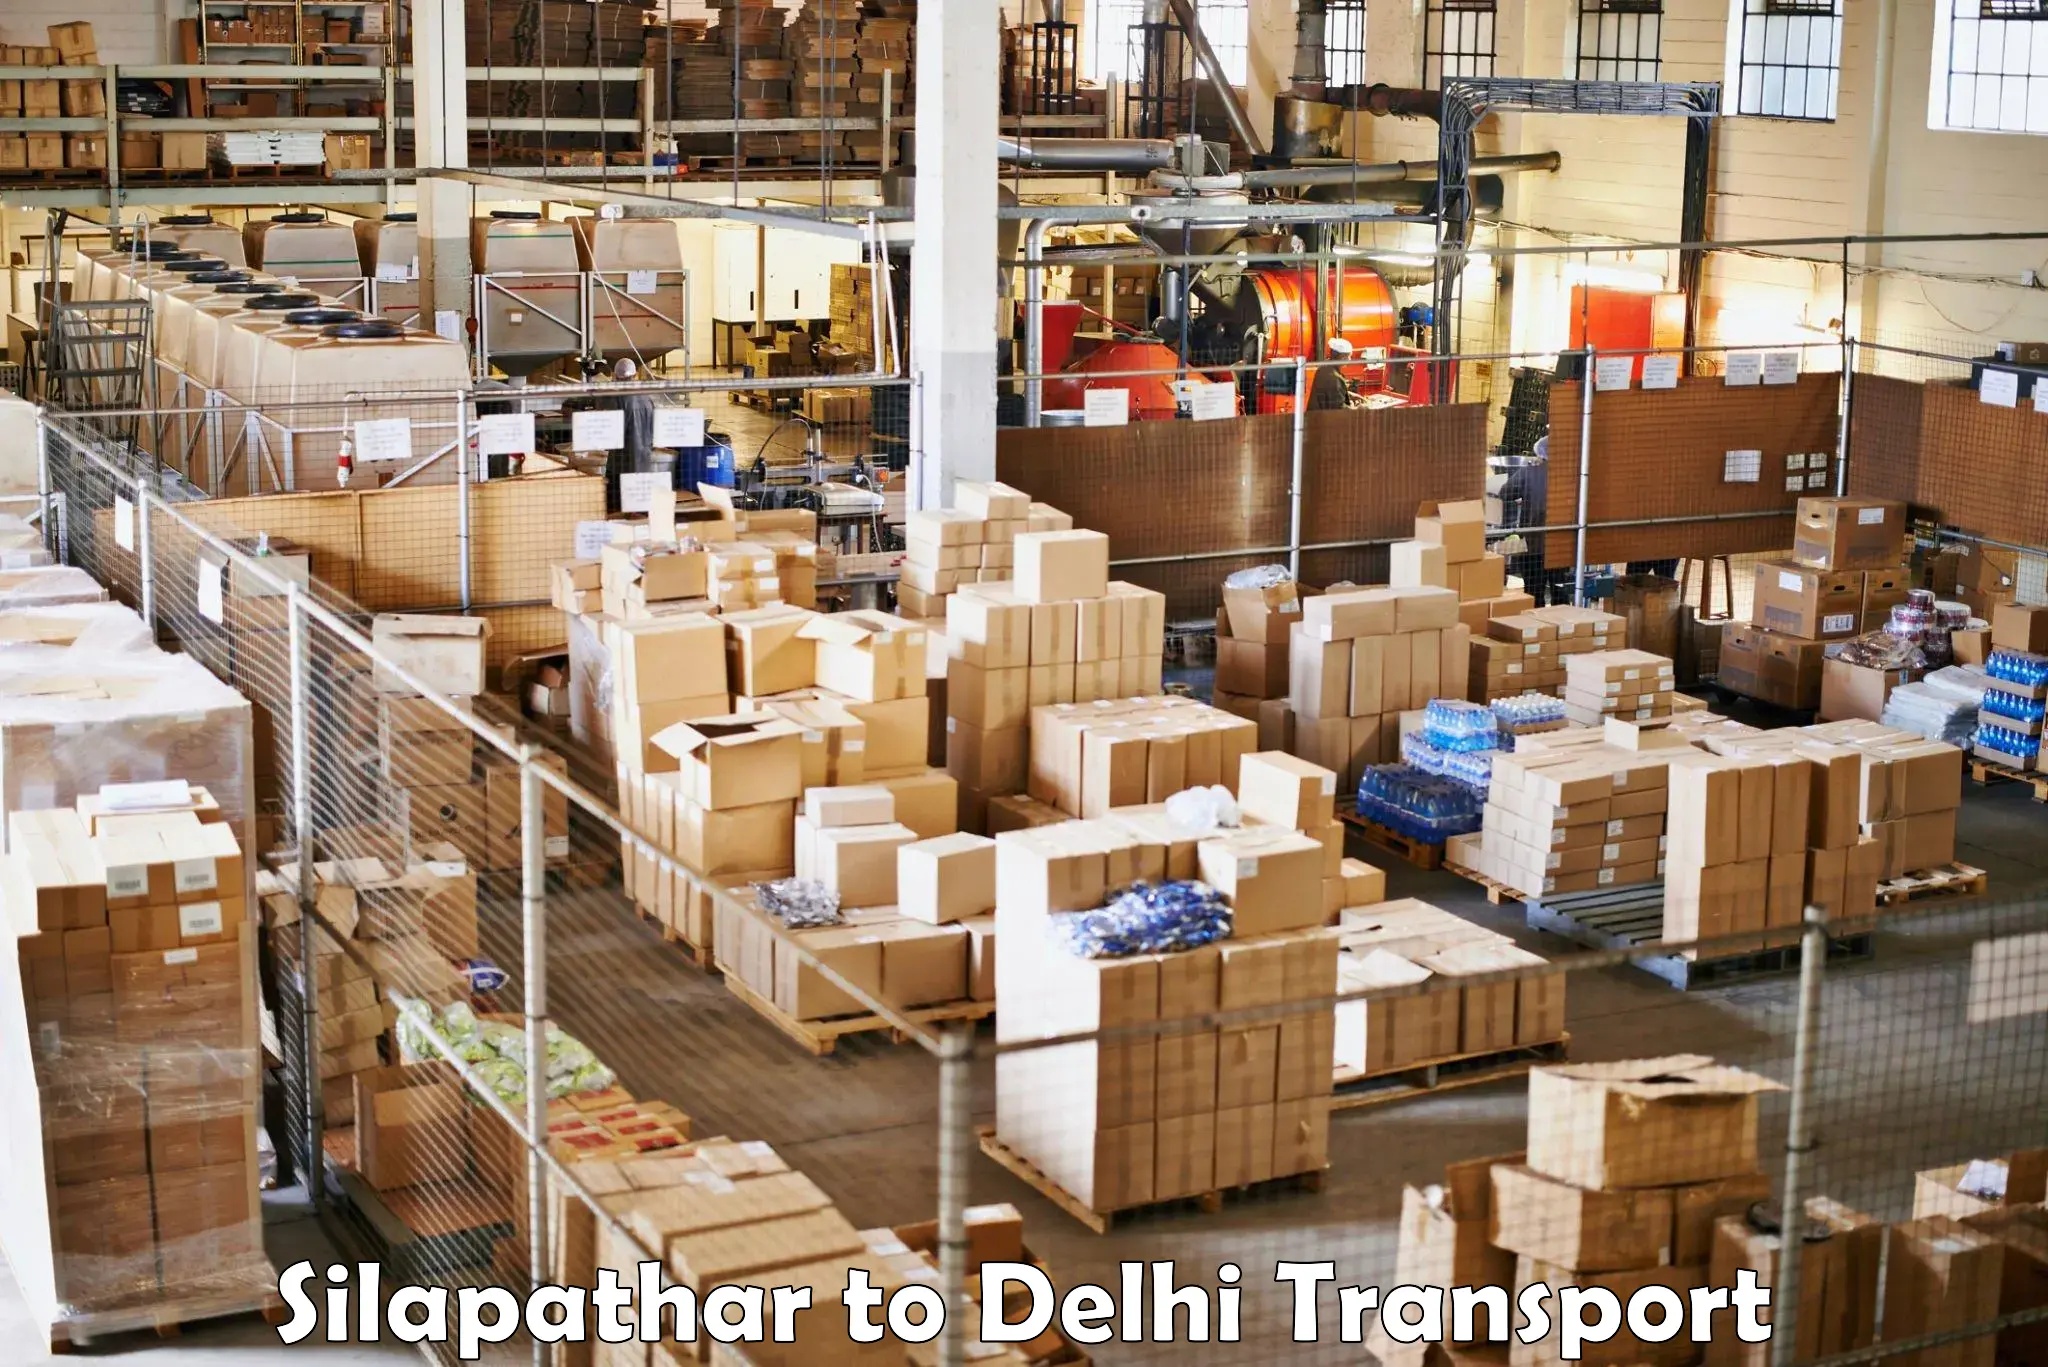 Delivery service Silapathar to Lodhi Road